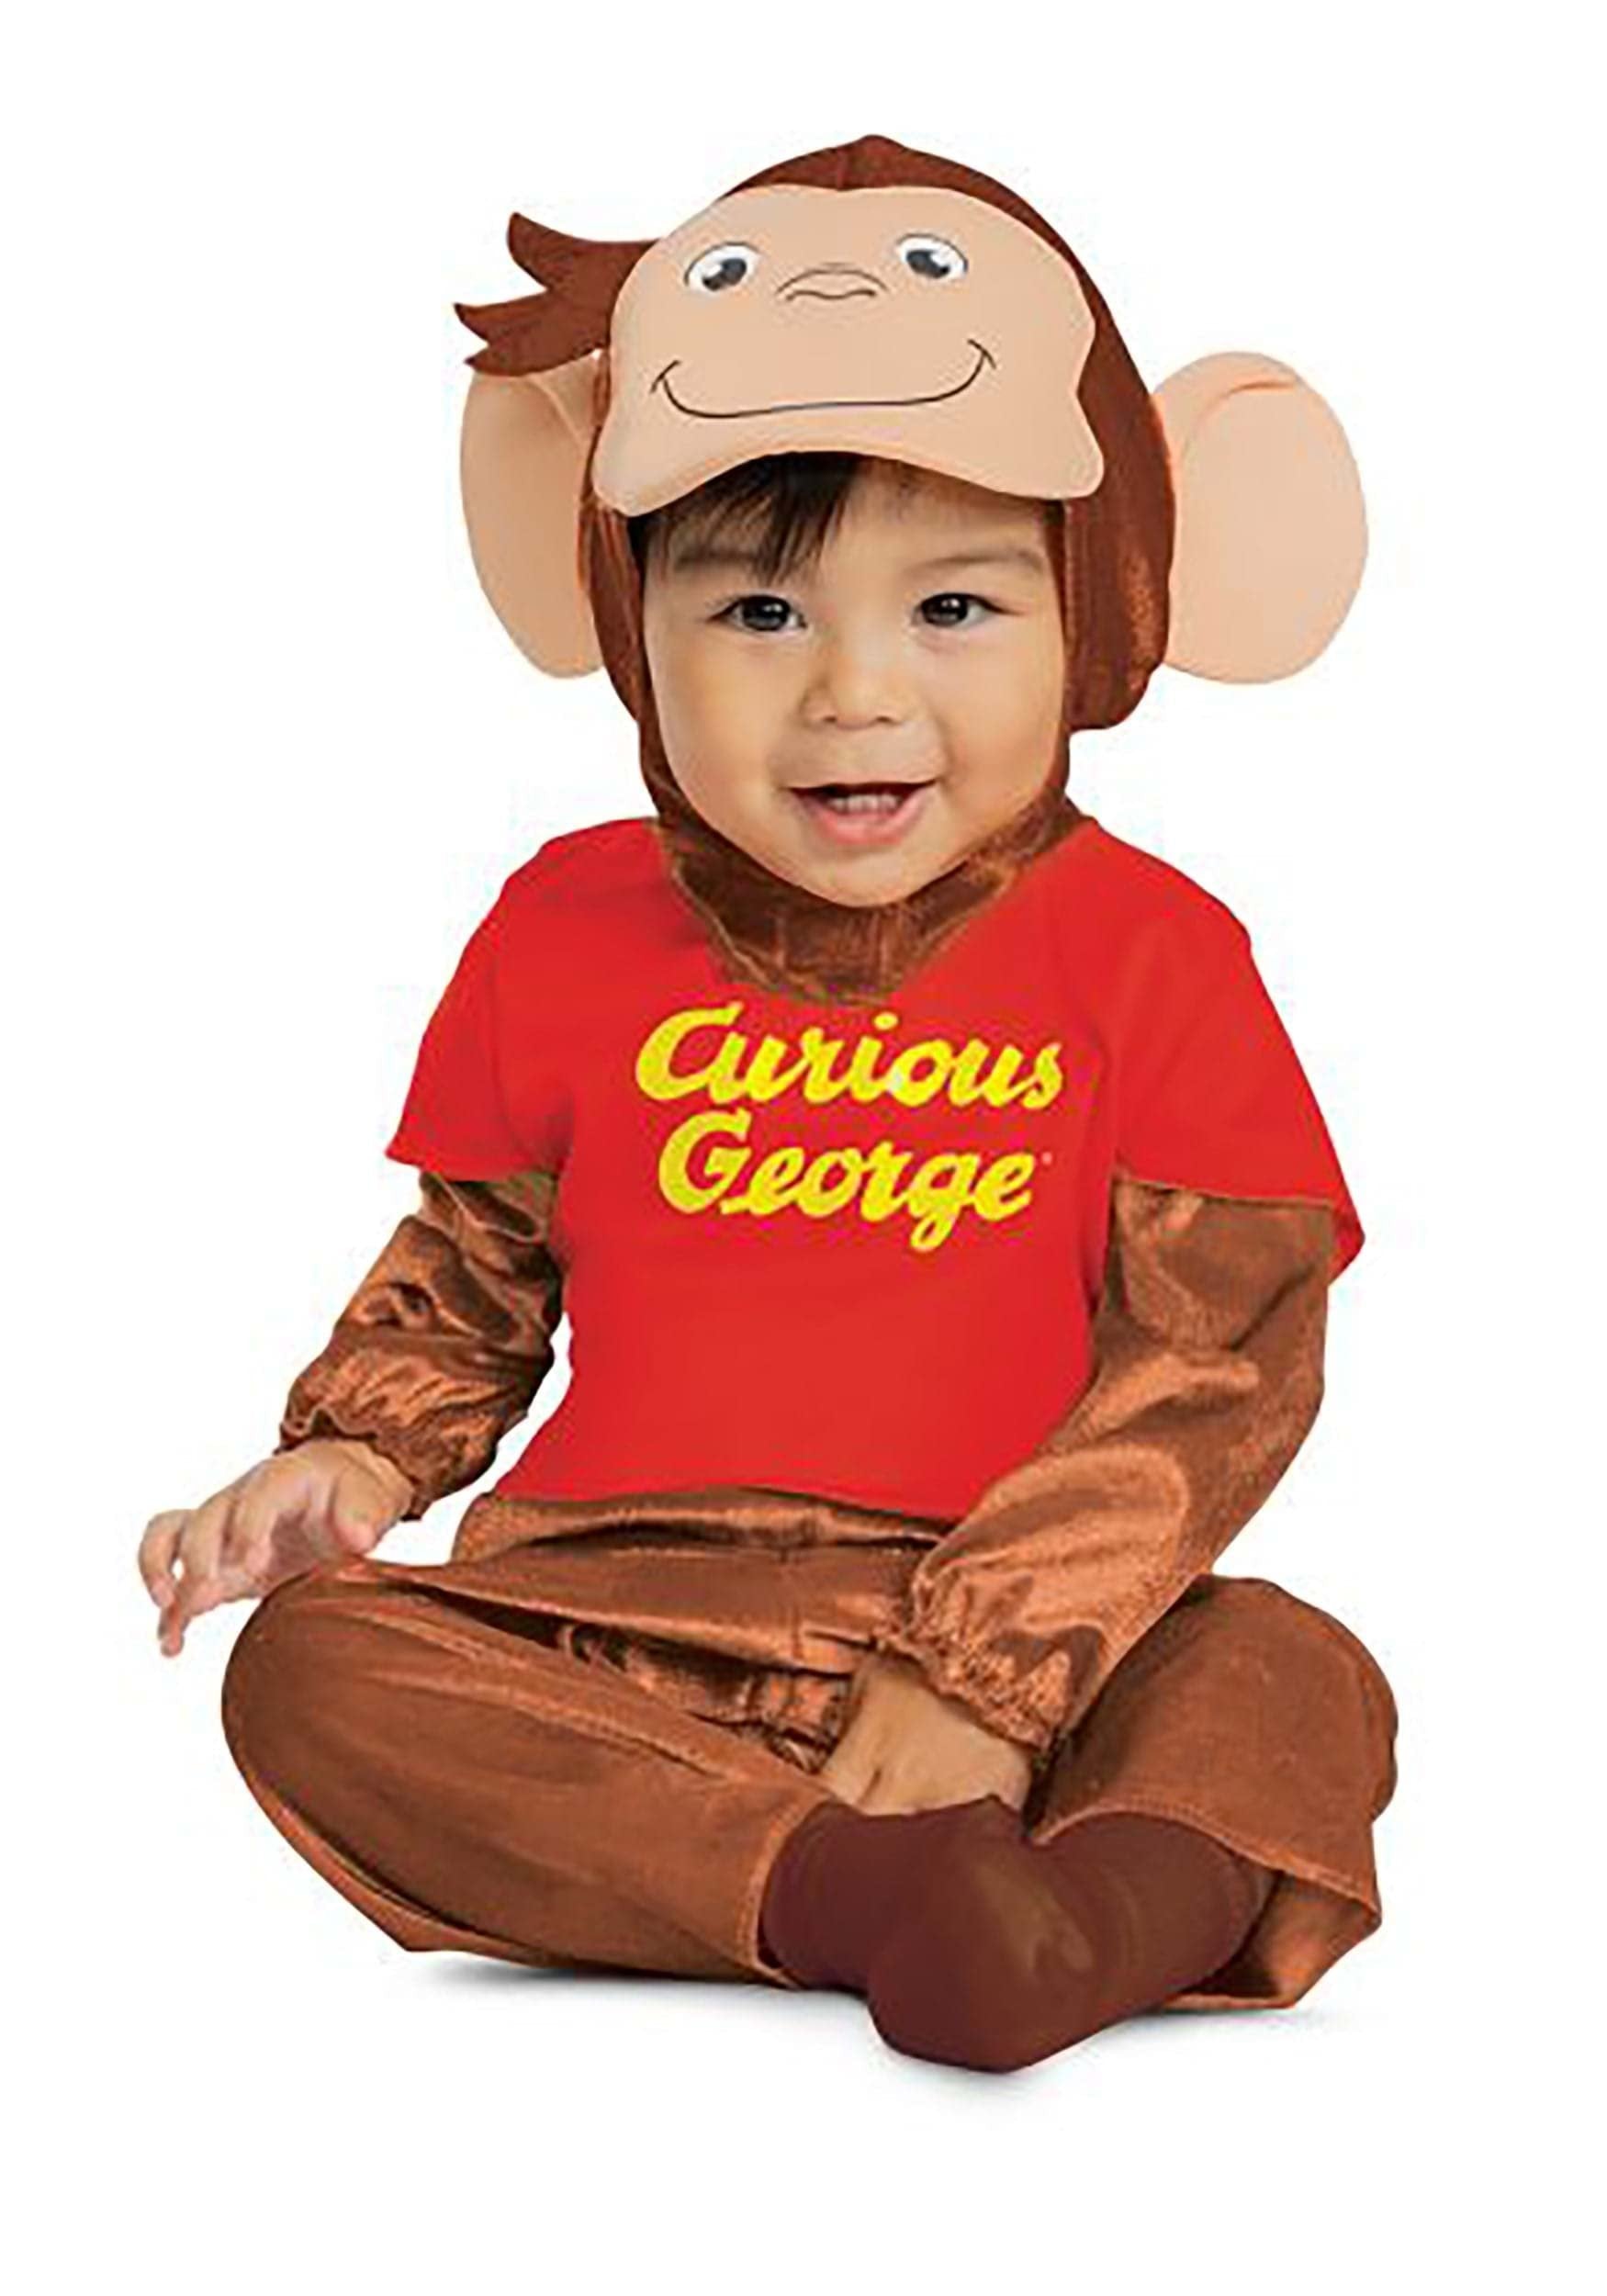 Disguise Curious George Costume for Kids, Official Curious George Costume, Toddler Size Small (2T)